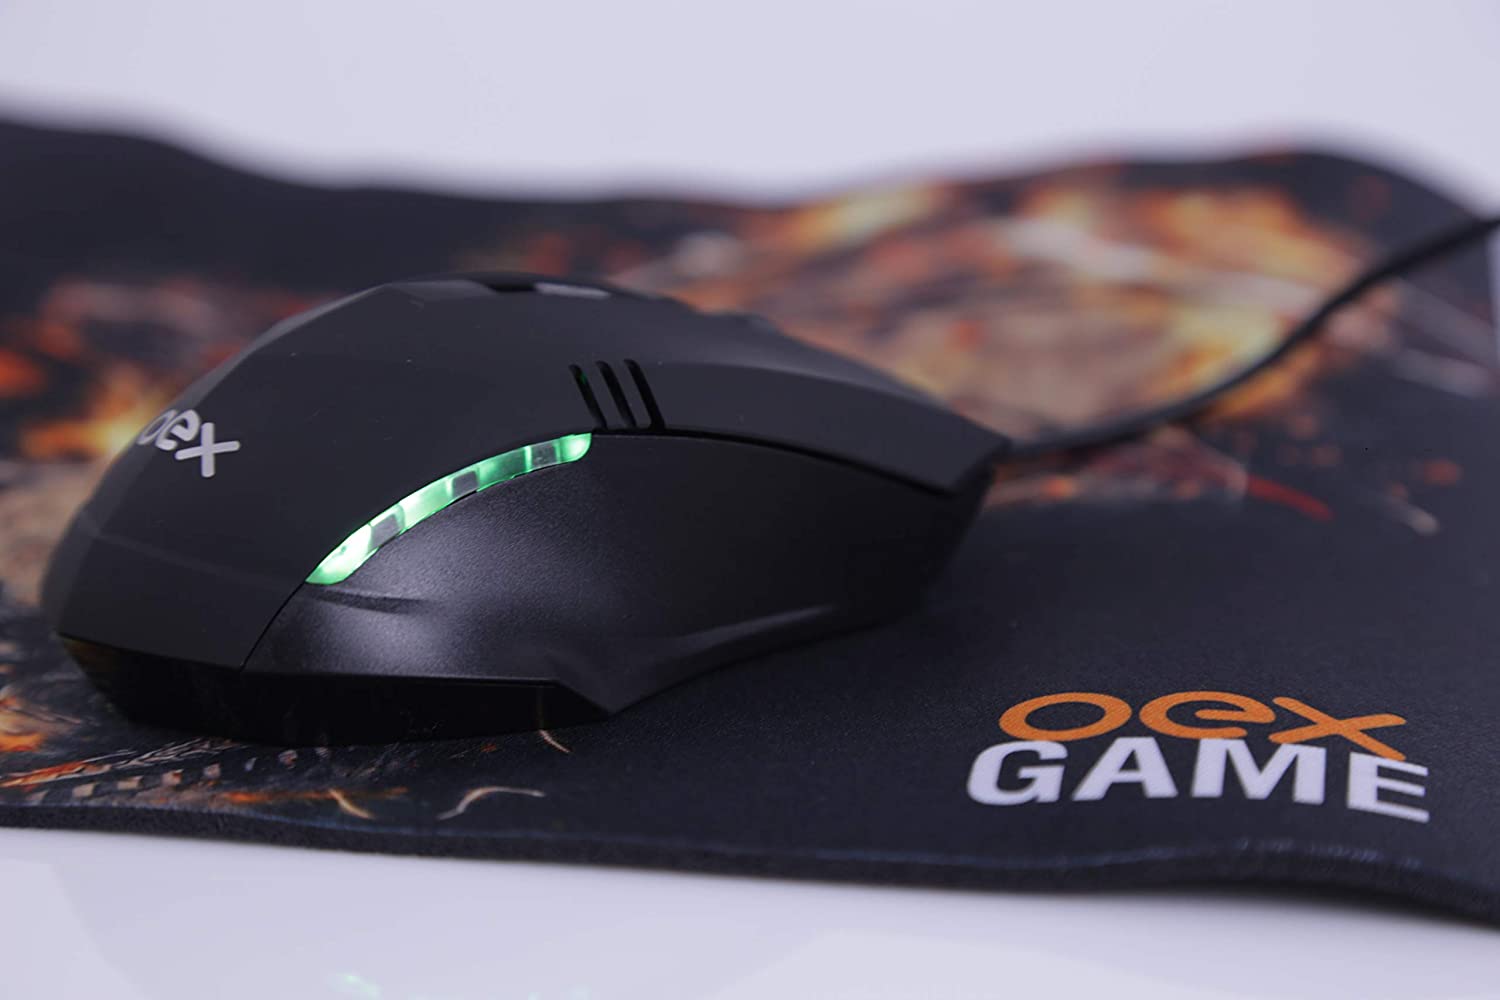 COMBO ARENA MOUSE GAMER 2400 DPI + MOUSE PAD OEX MC102